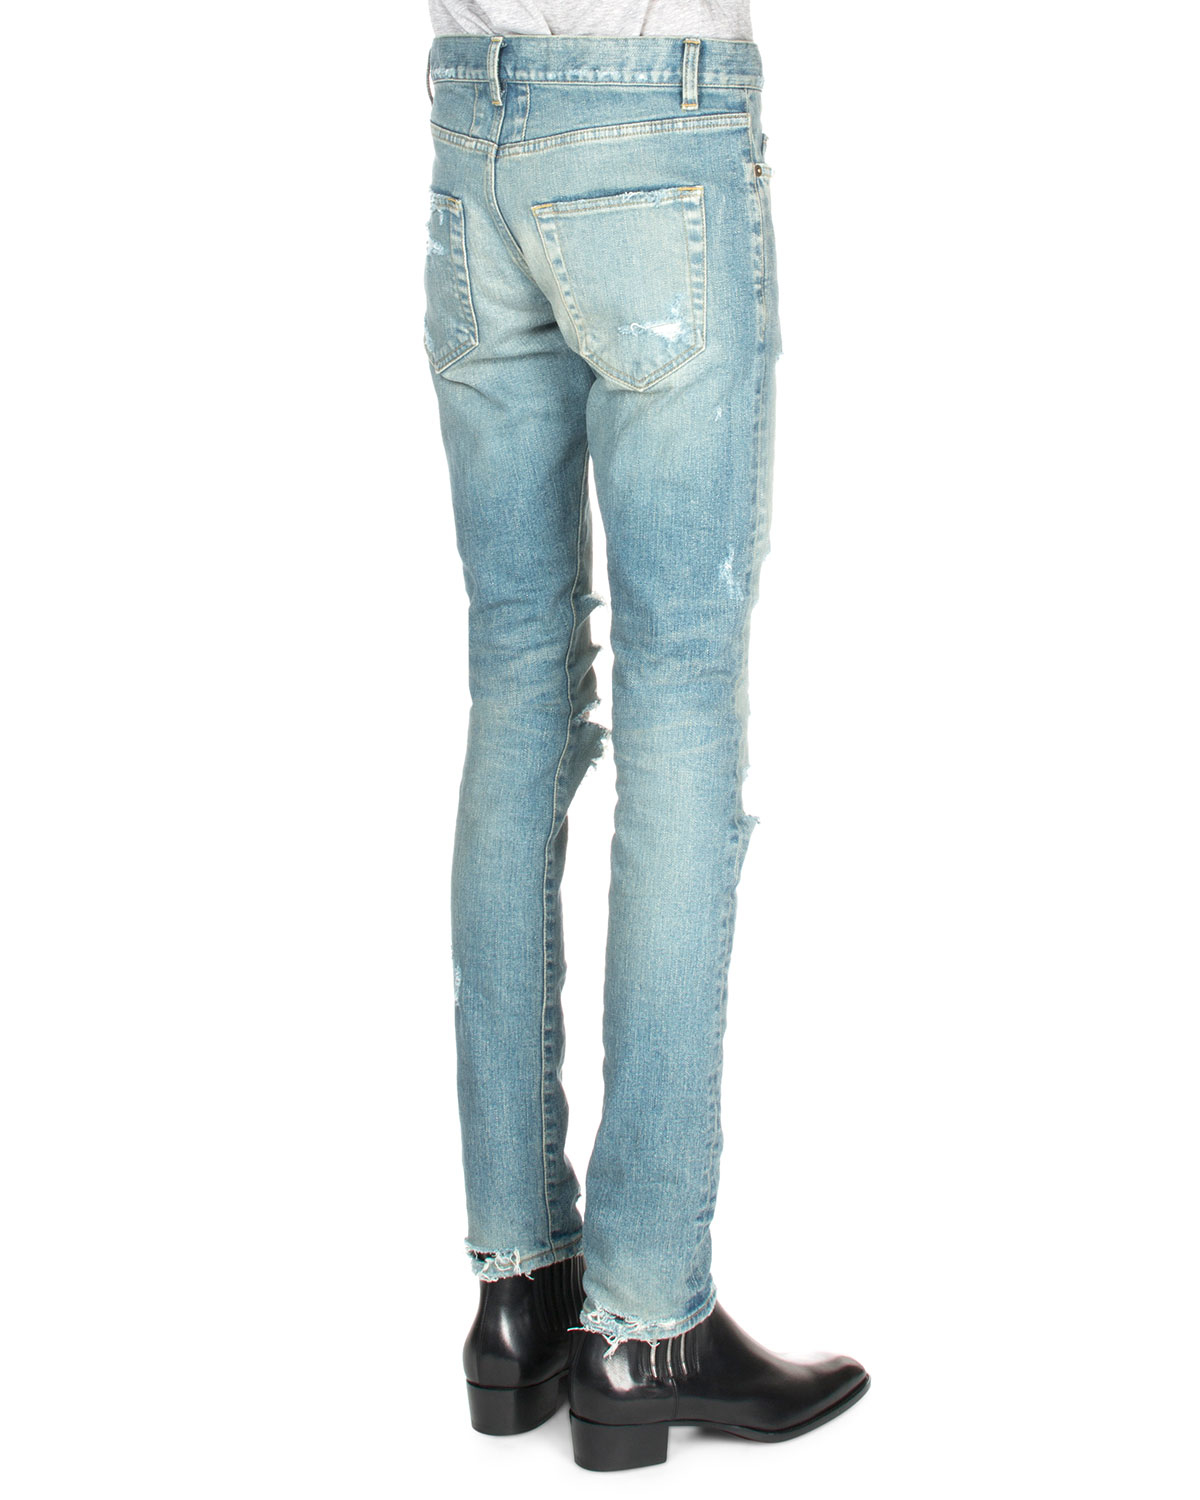 Saint laurent Trashed Ripped-knee Denim Jeans in Blue | Lyst